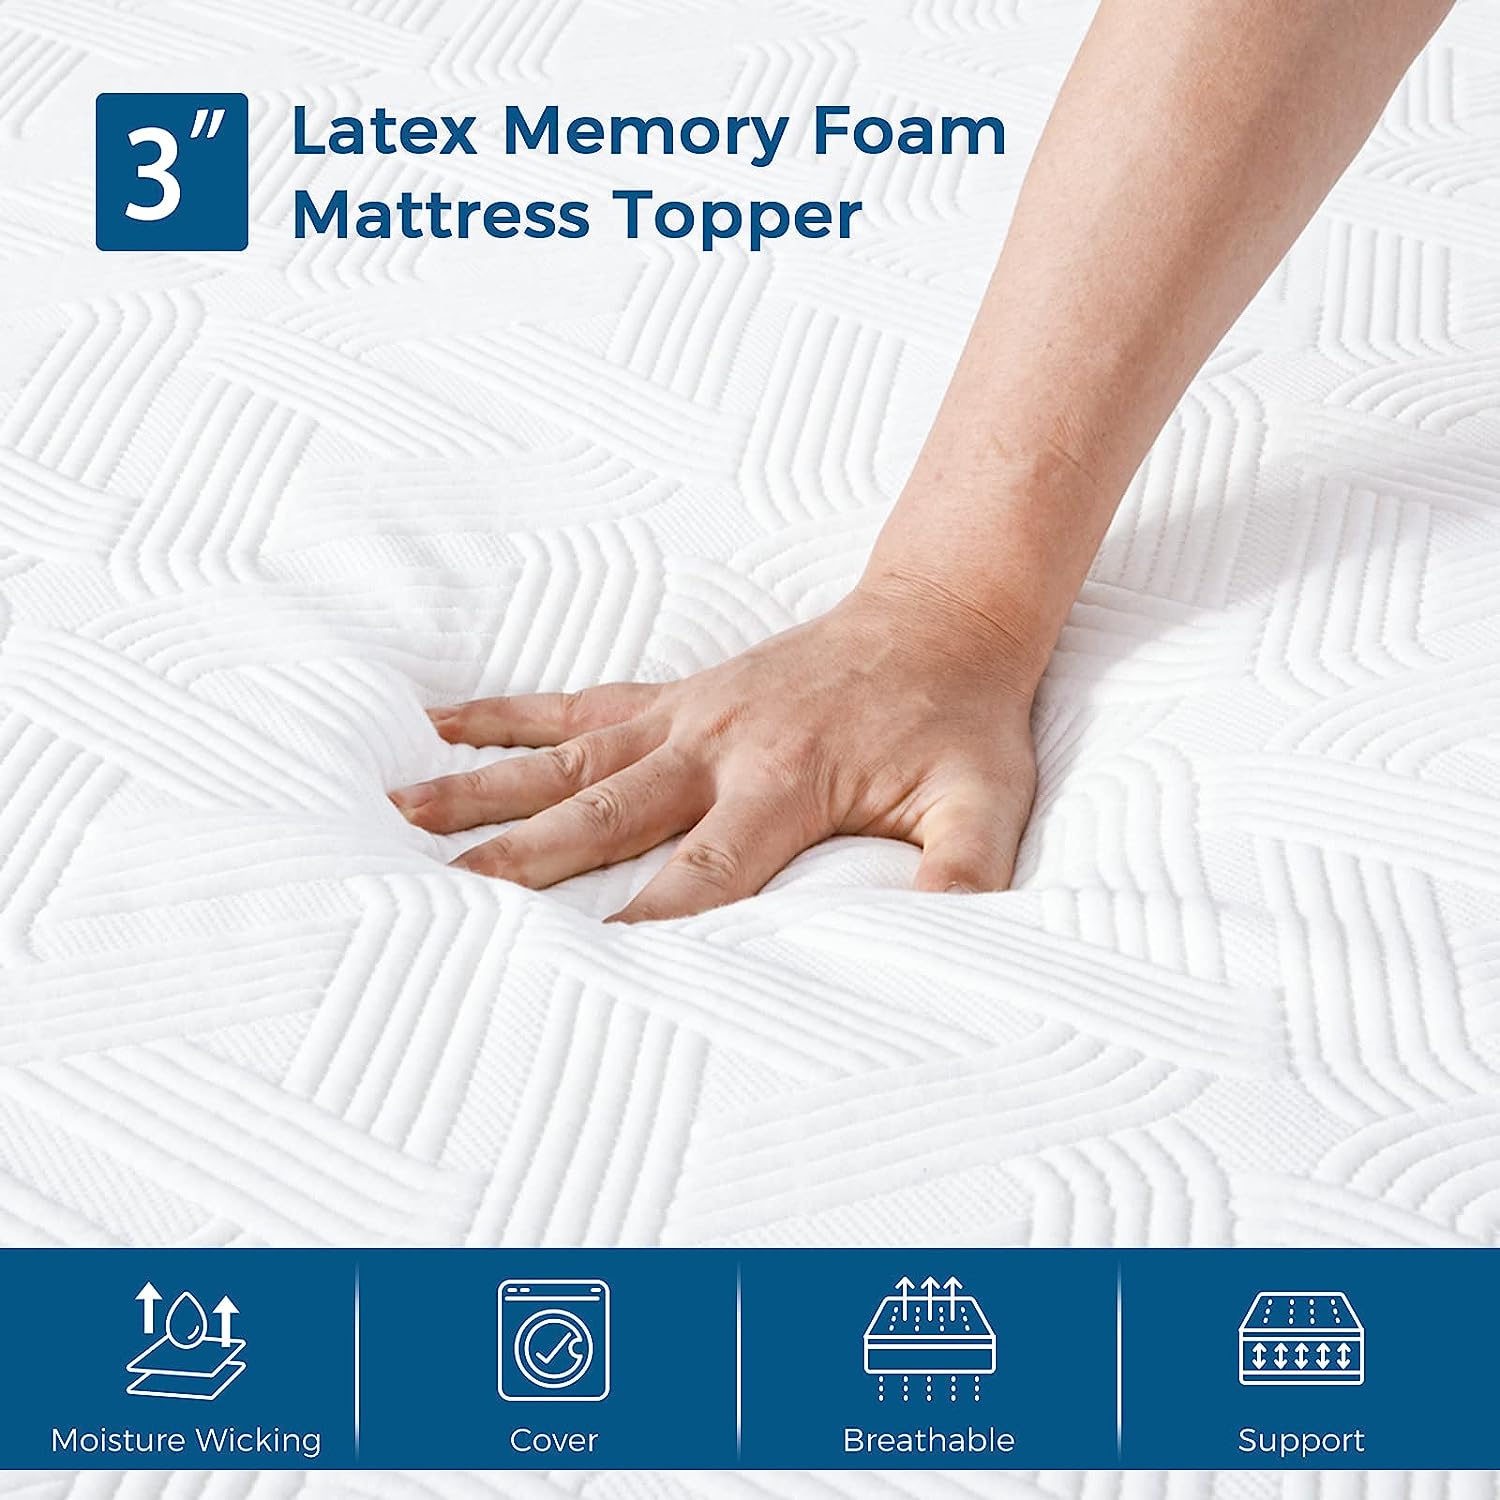 Inofia Sleep Memory Foam Mattress Topper Double Bed, 3Inch LATEXCH Medium Firm Feel Mattress Topper for Back Pain with Removable Cover, CertiPUR-EU